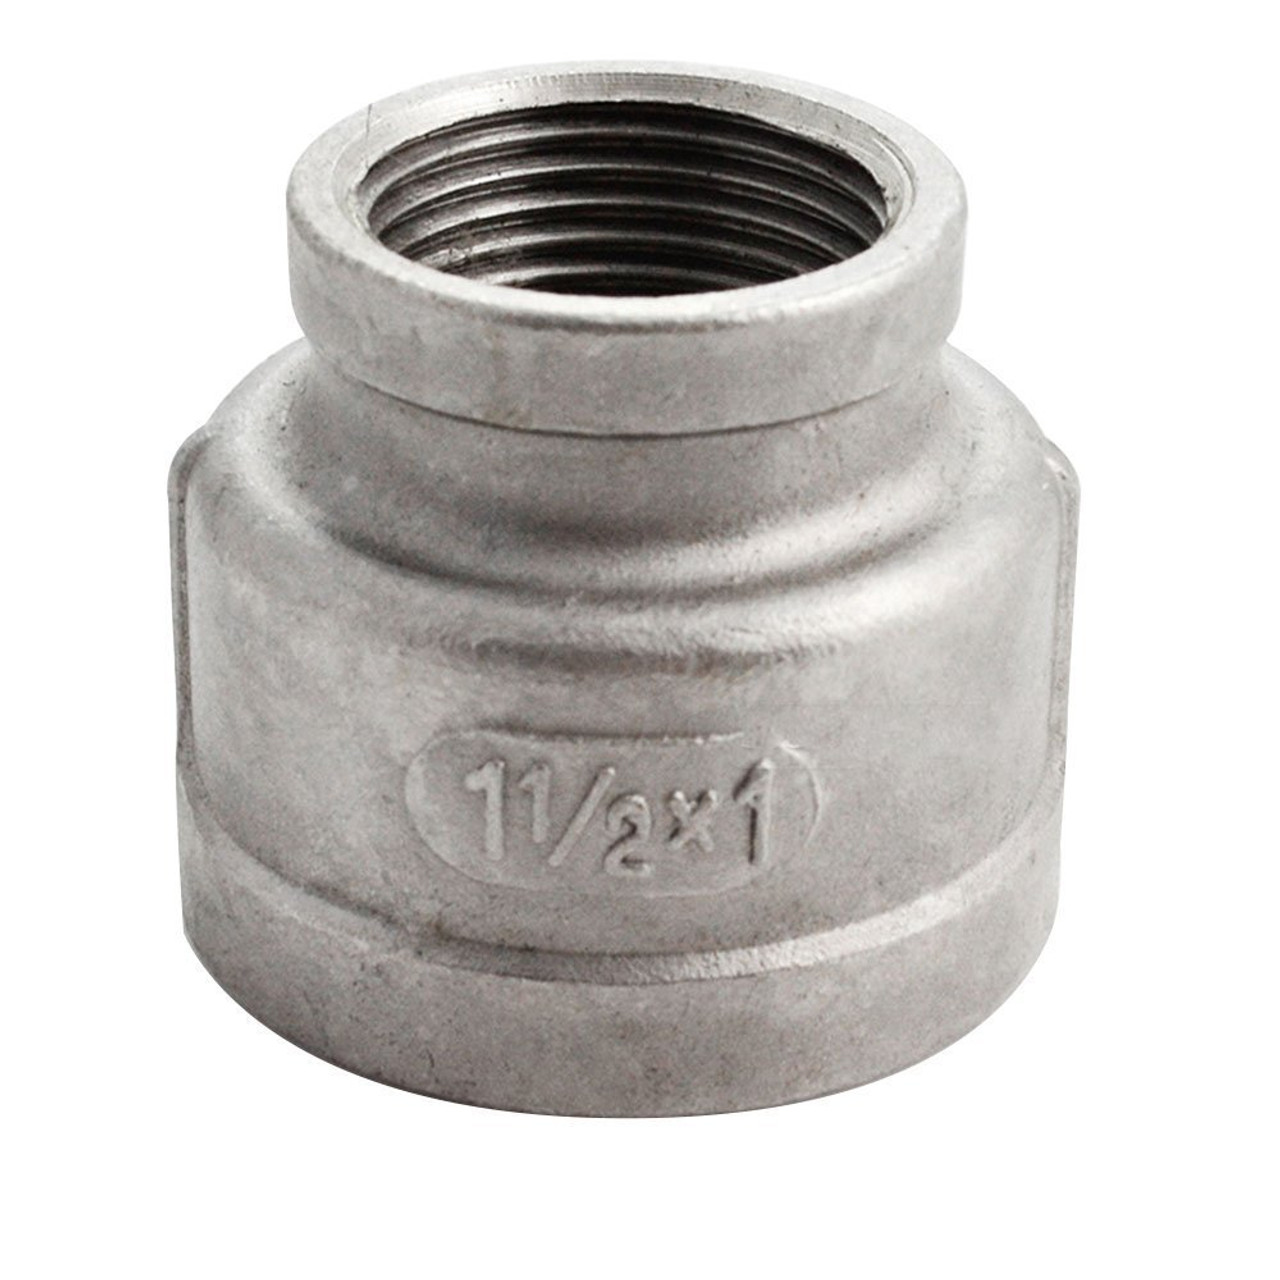 1/2 x 1/4" Stainless Steel 316 Female NPT Reducer Coupling  SS119-DB